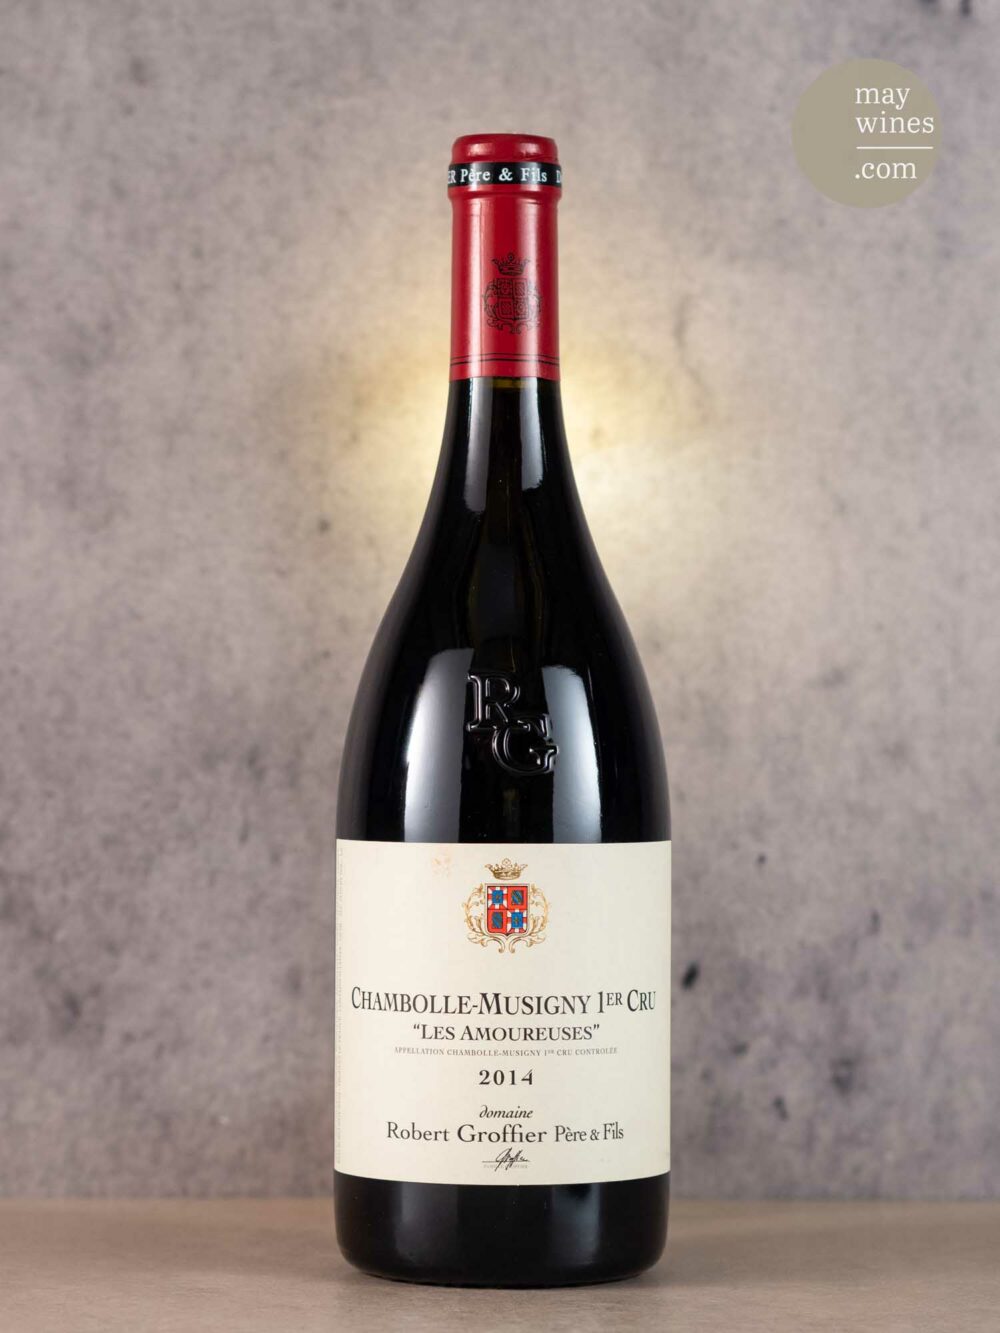 May Wines – Rotwein – 2014 Chambolle-Musigny Les Amoureuses Premier Cru - Domaine Robert Groffier Père & Fils